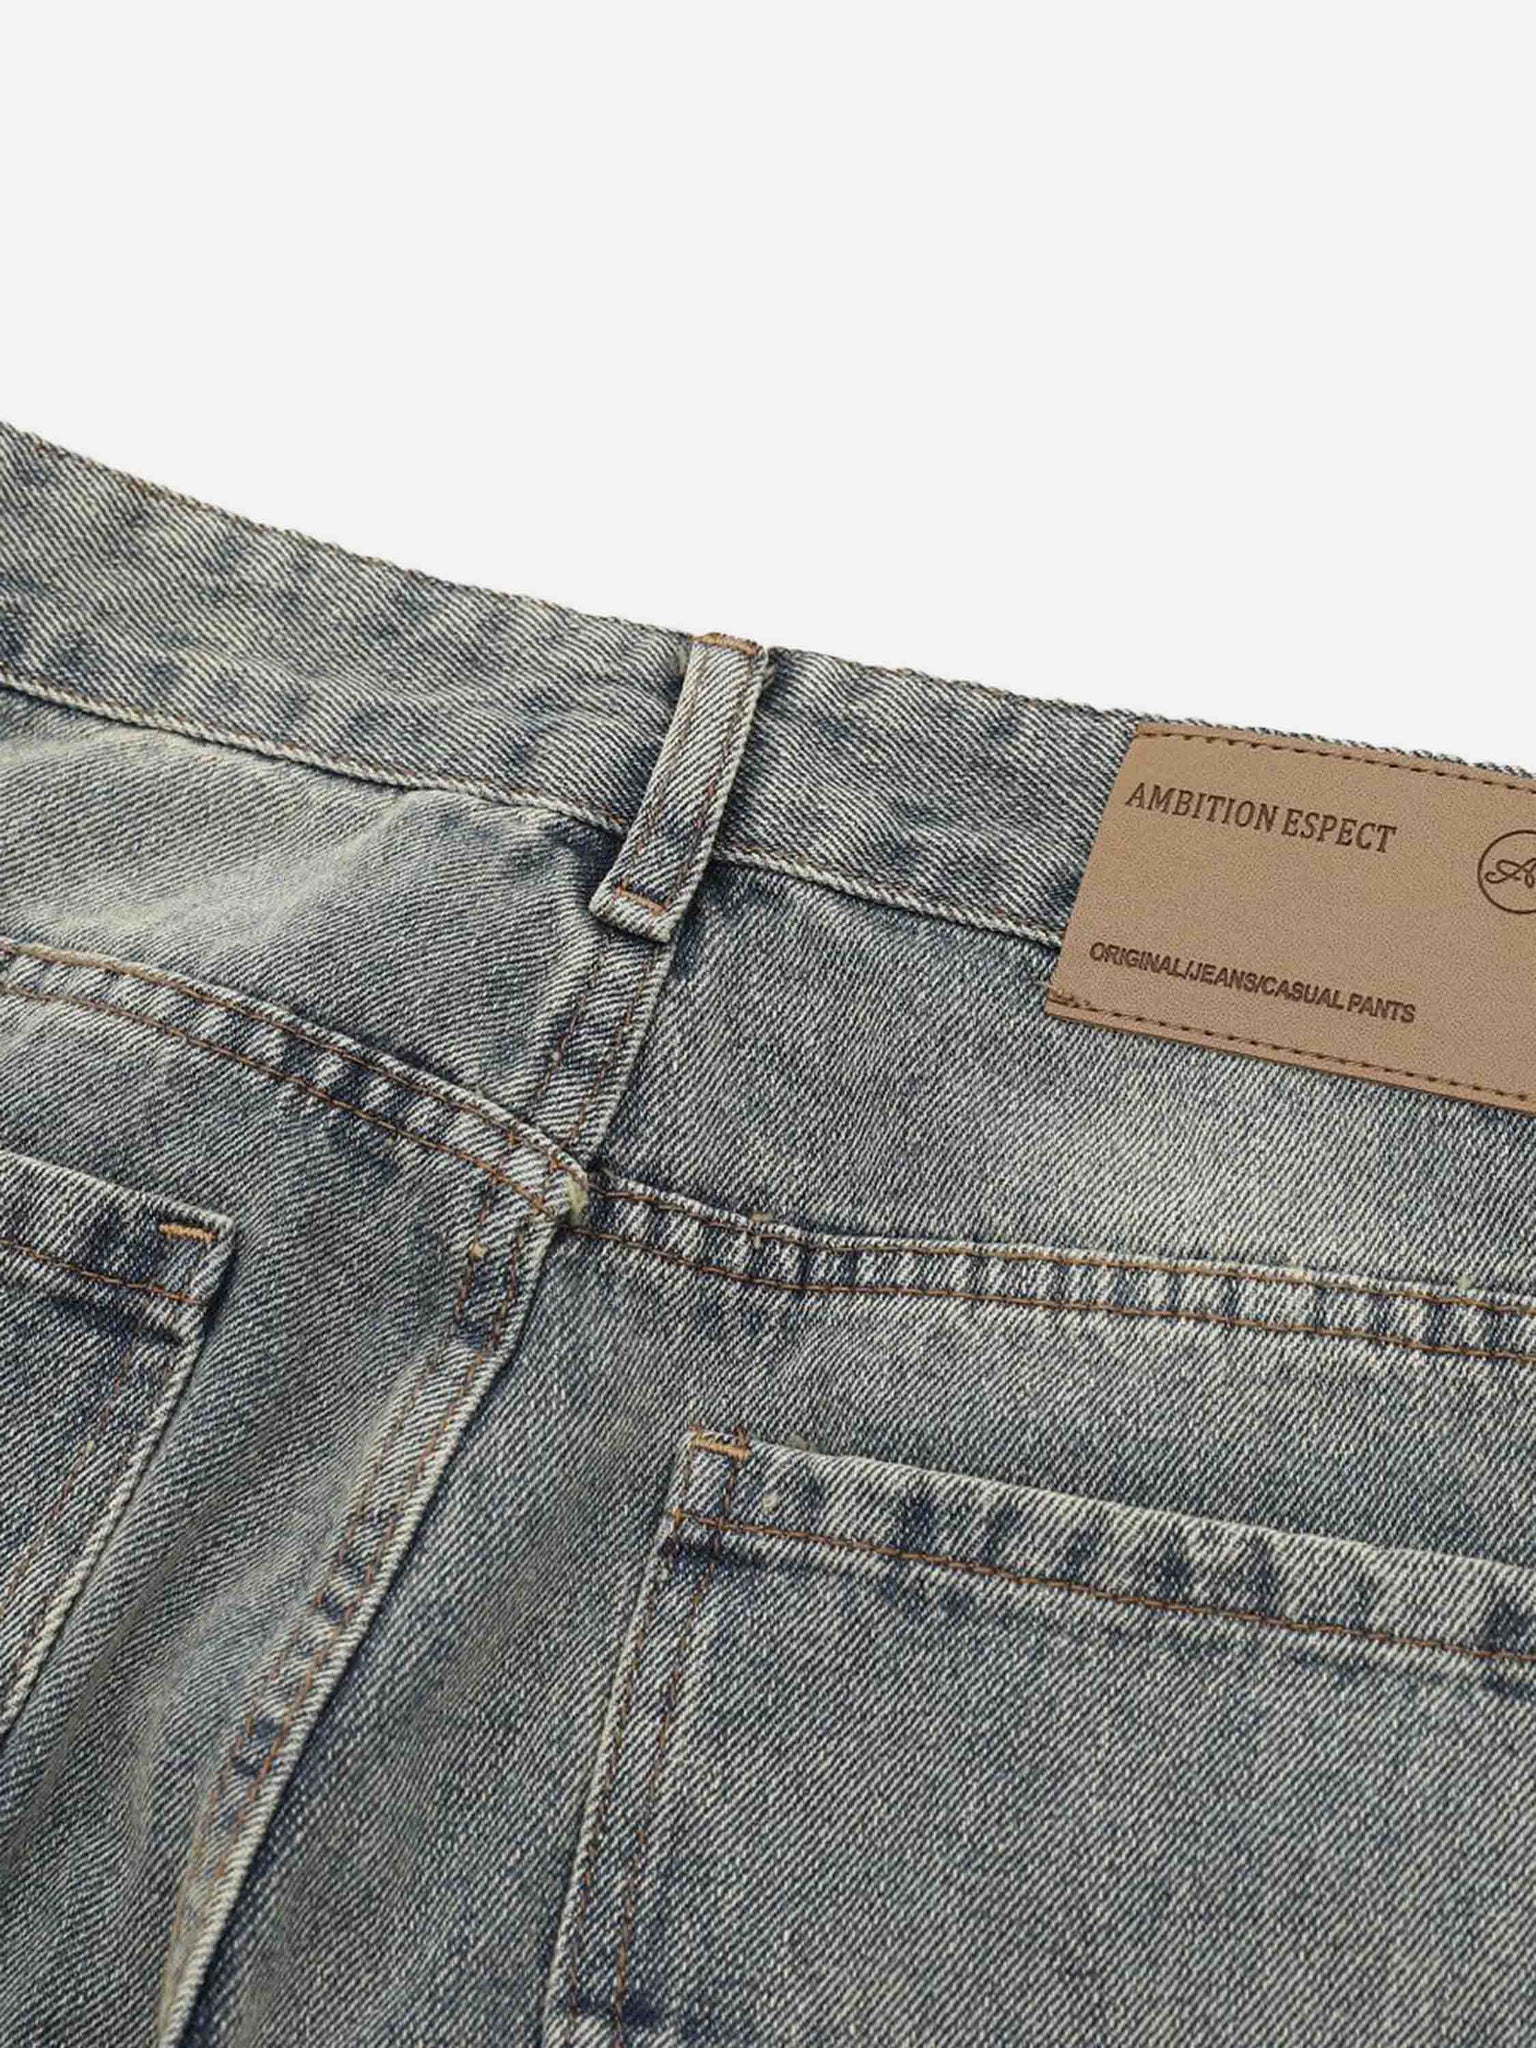 Thesupermade American High Street Washed And Torn Work Pockets Straight Denim Pants - 1646